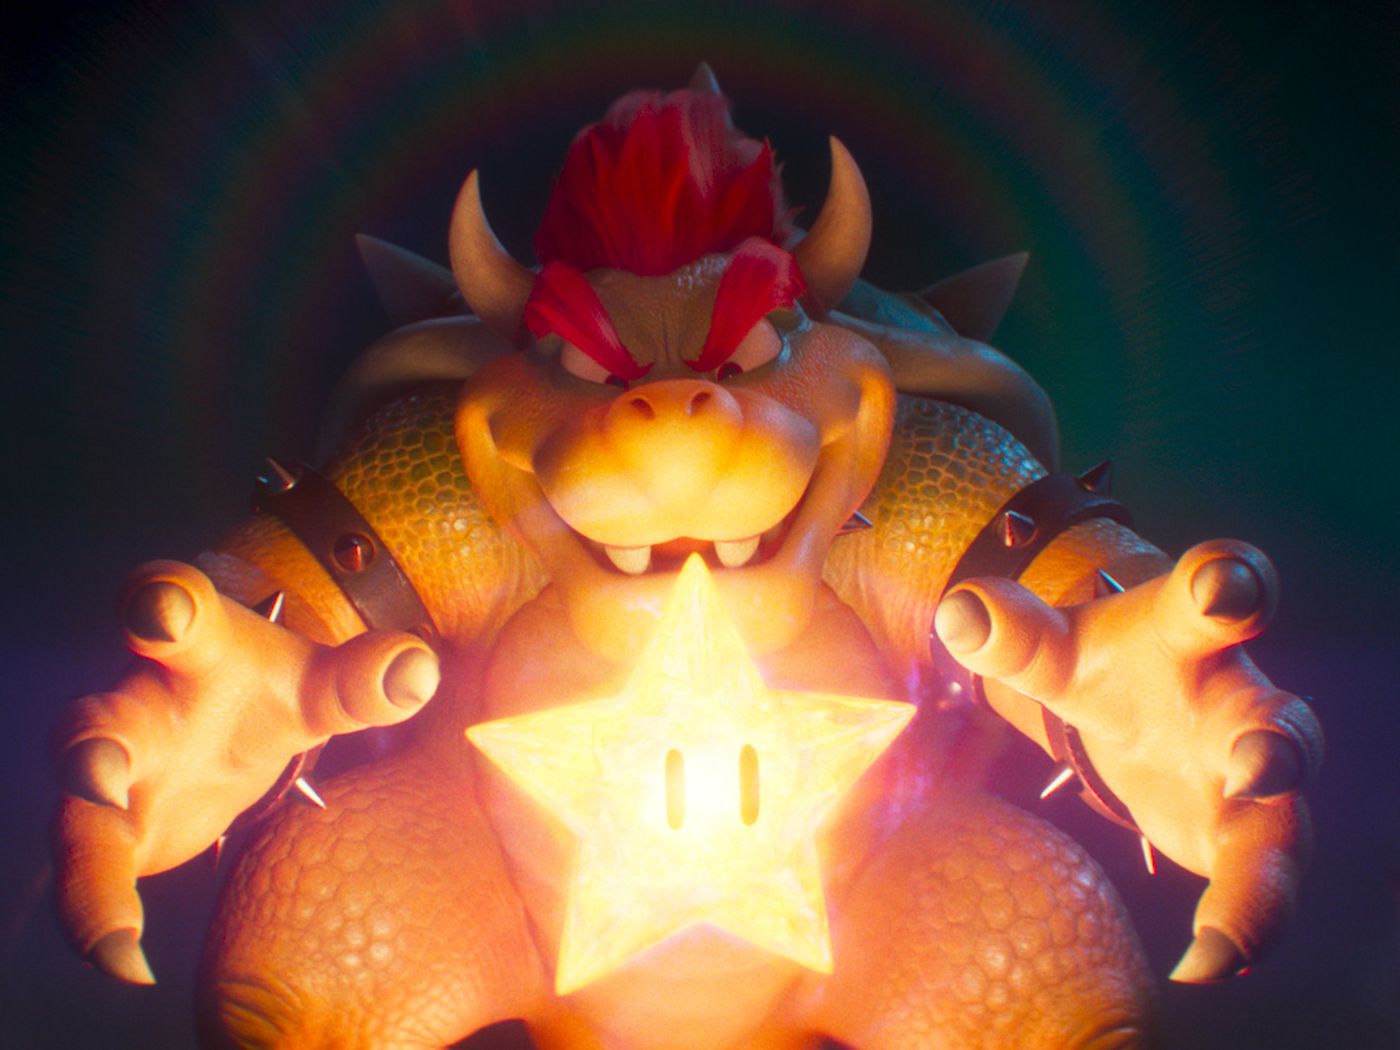 Jack Black's Bowser is the best part of The Super Mario Bros. movie